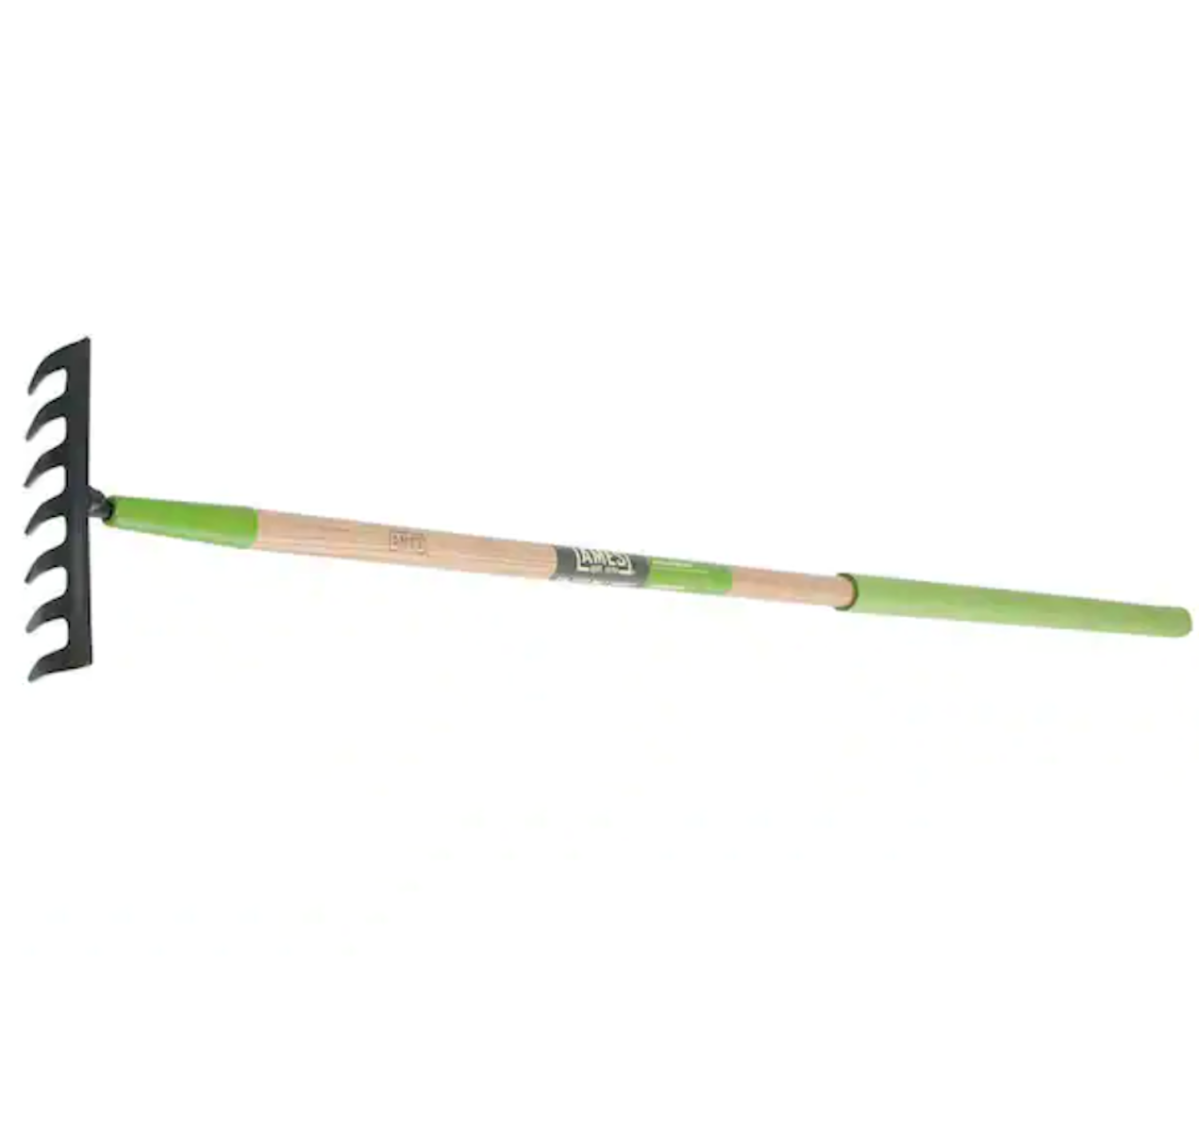 Ames floral rake with black head and wooden handle with green accents.